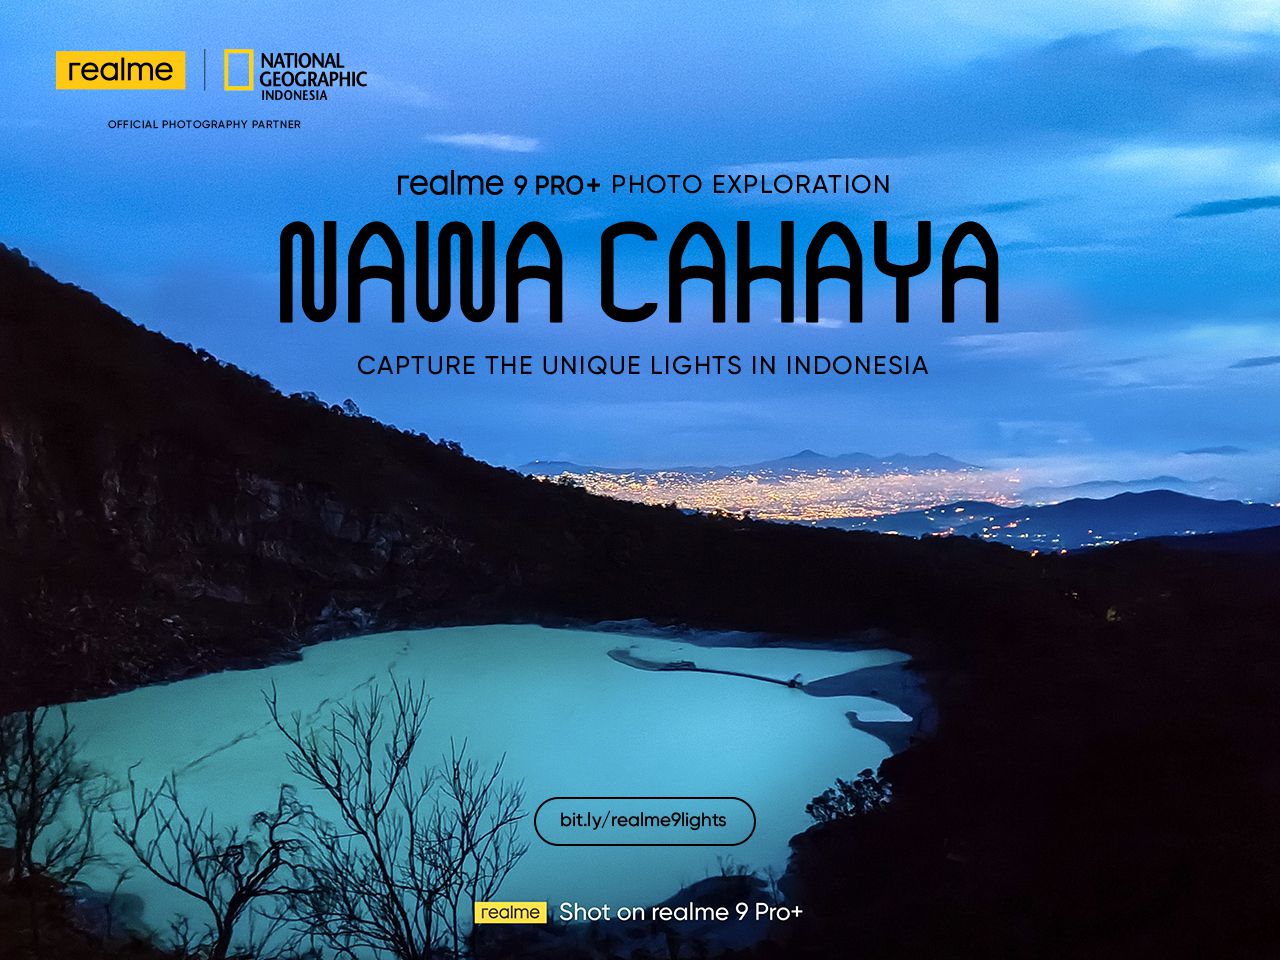 Realme x National Geographic